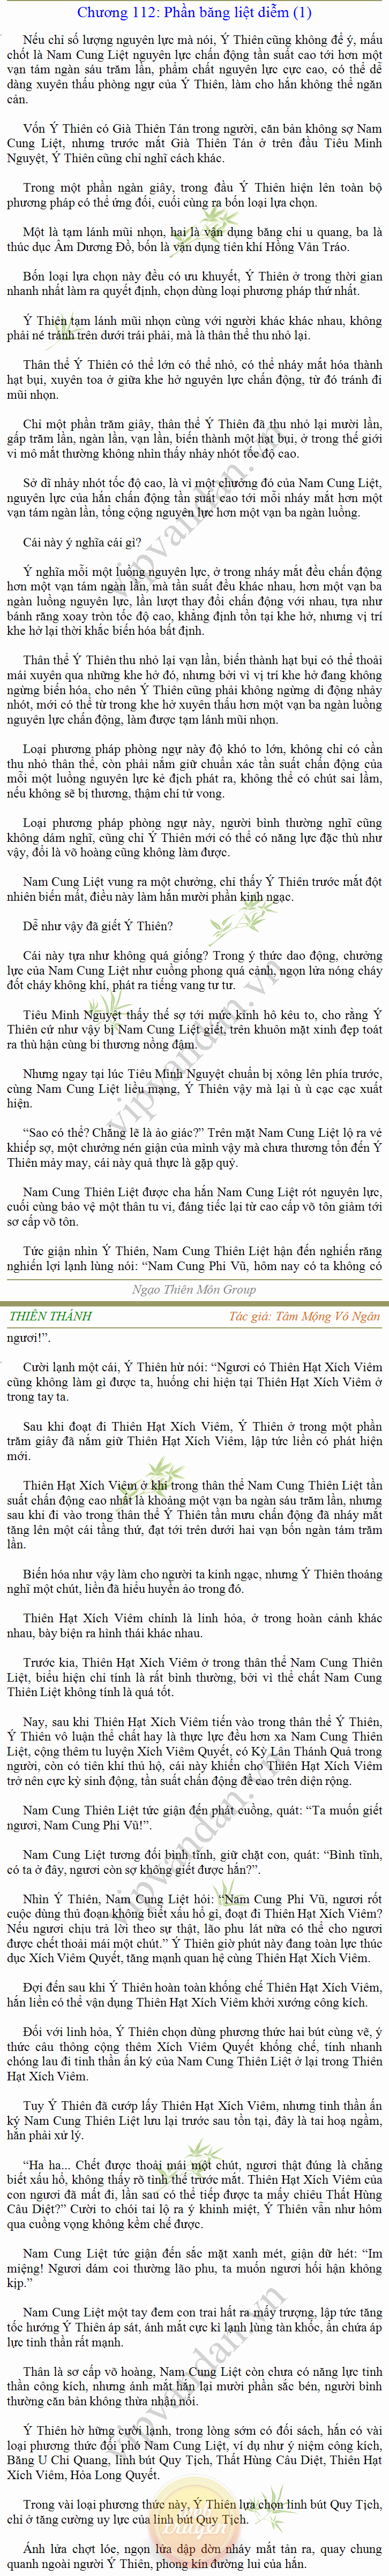 Thien-thanh-112.png